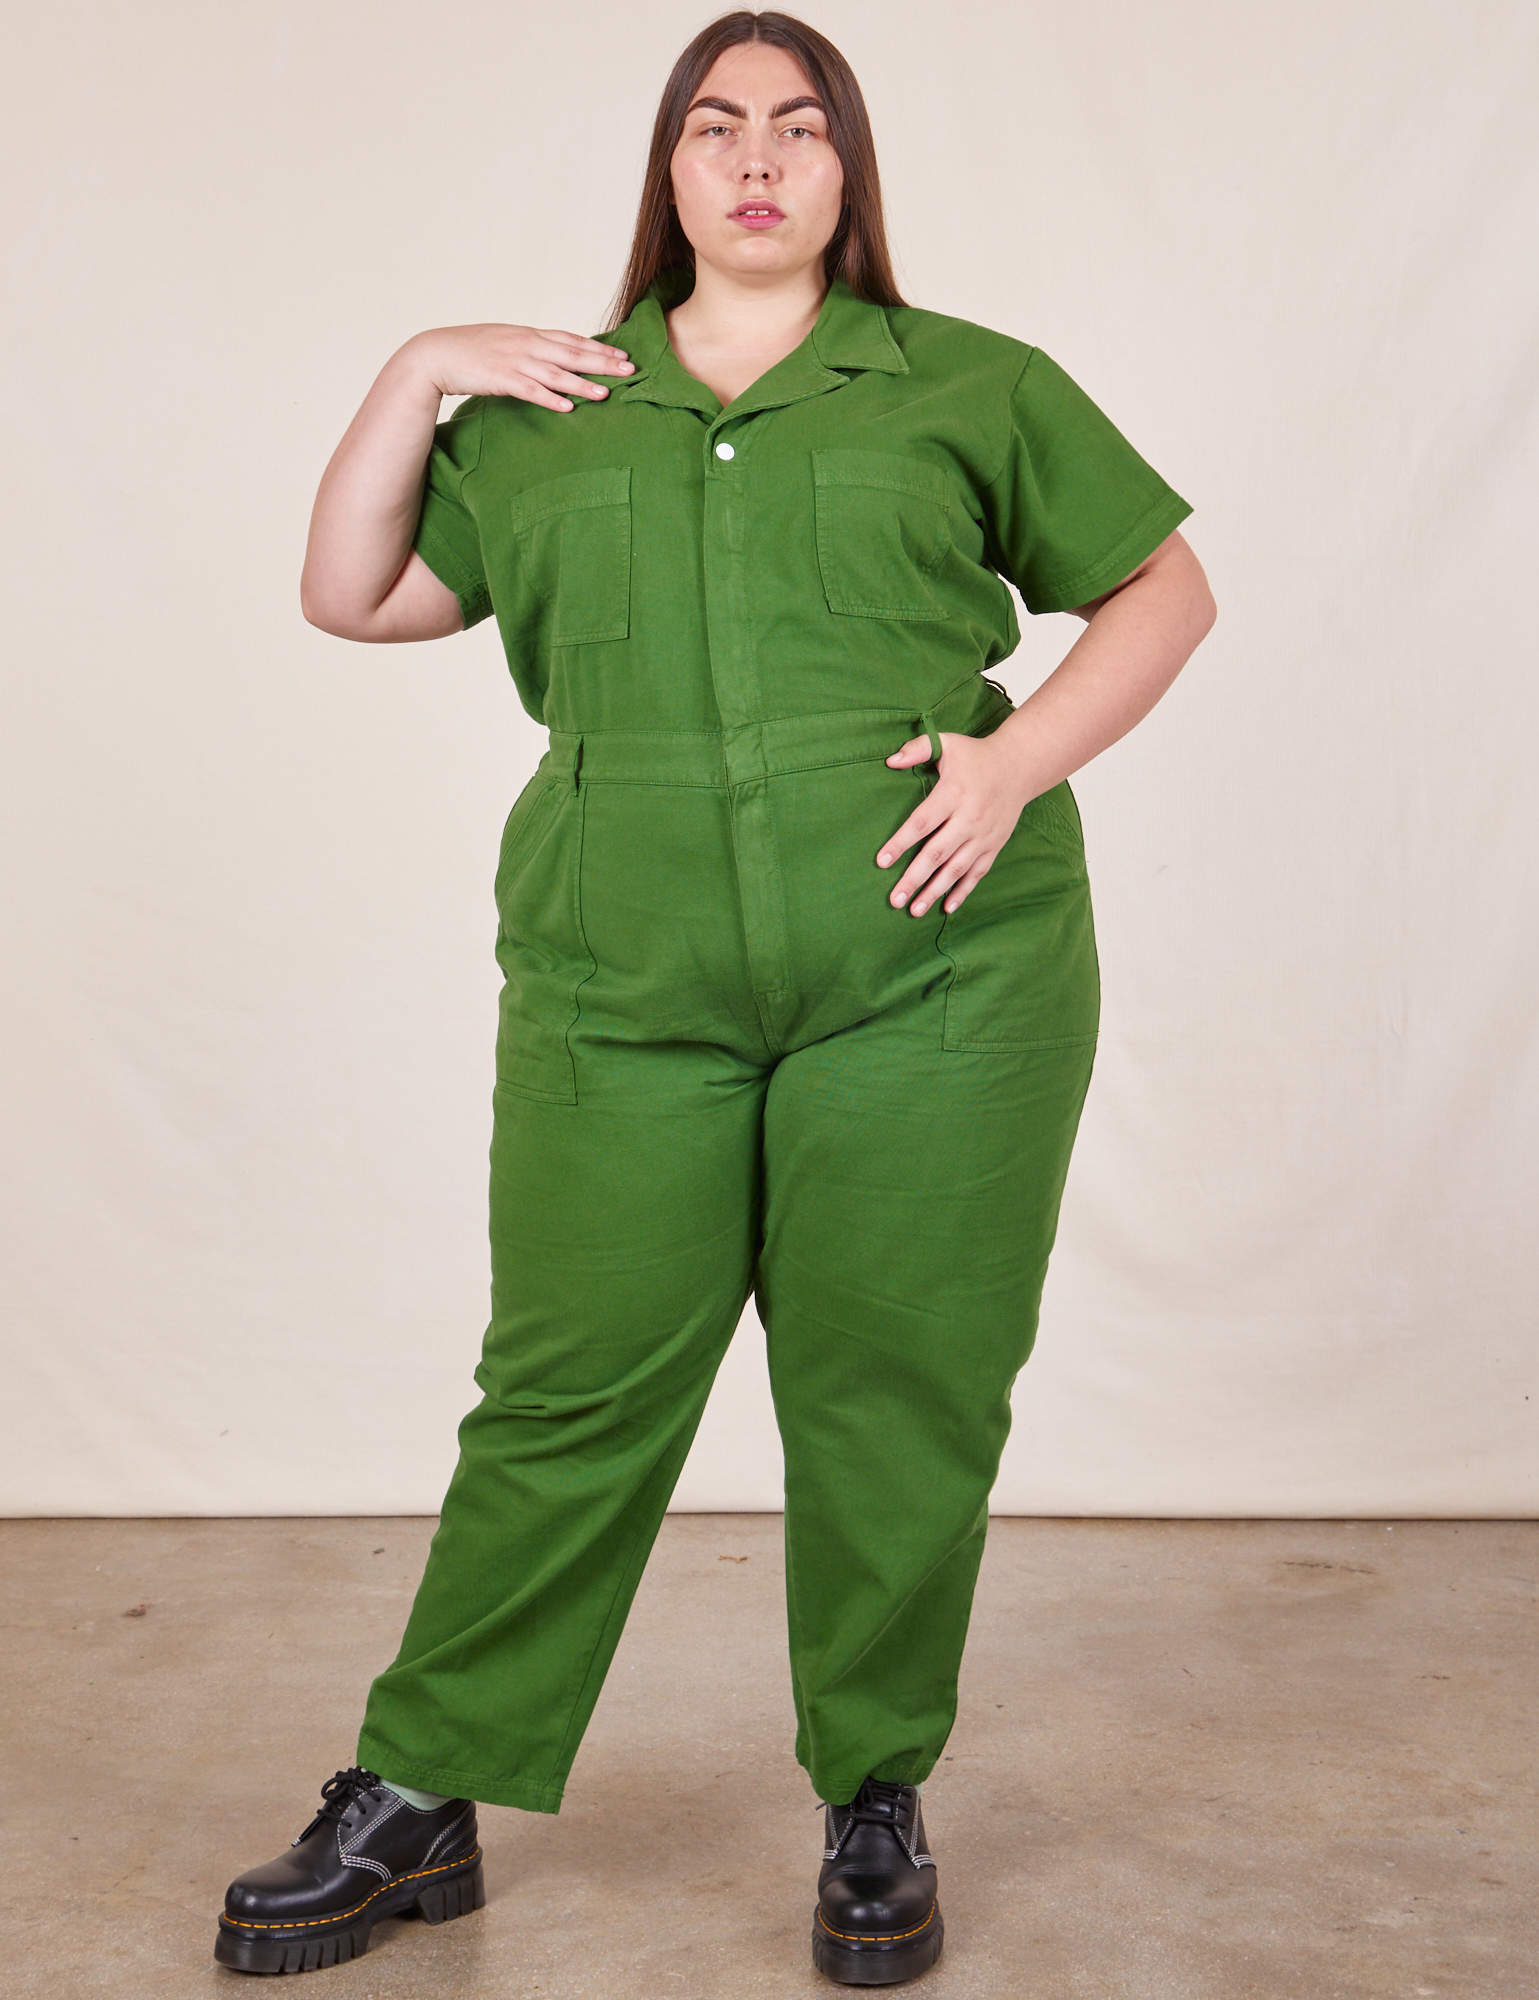 Marielena is 5’8” and wearing 2XL Short Sleeve Jumpsuit in Lawn Green